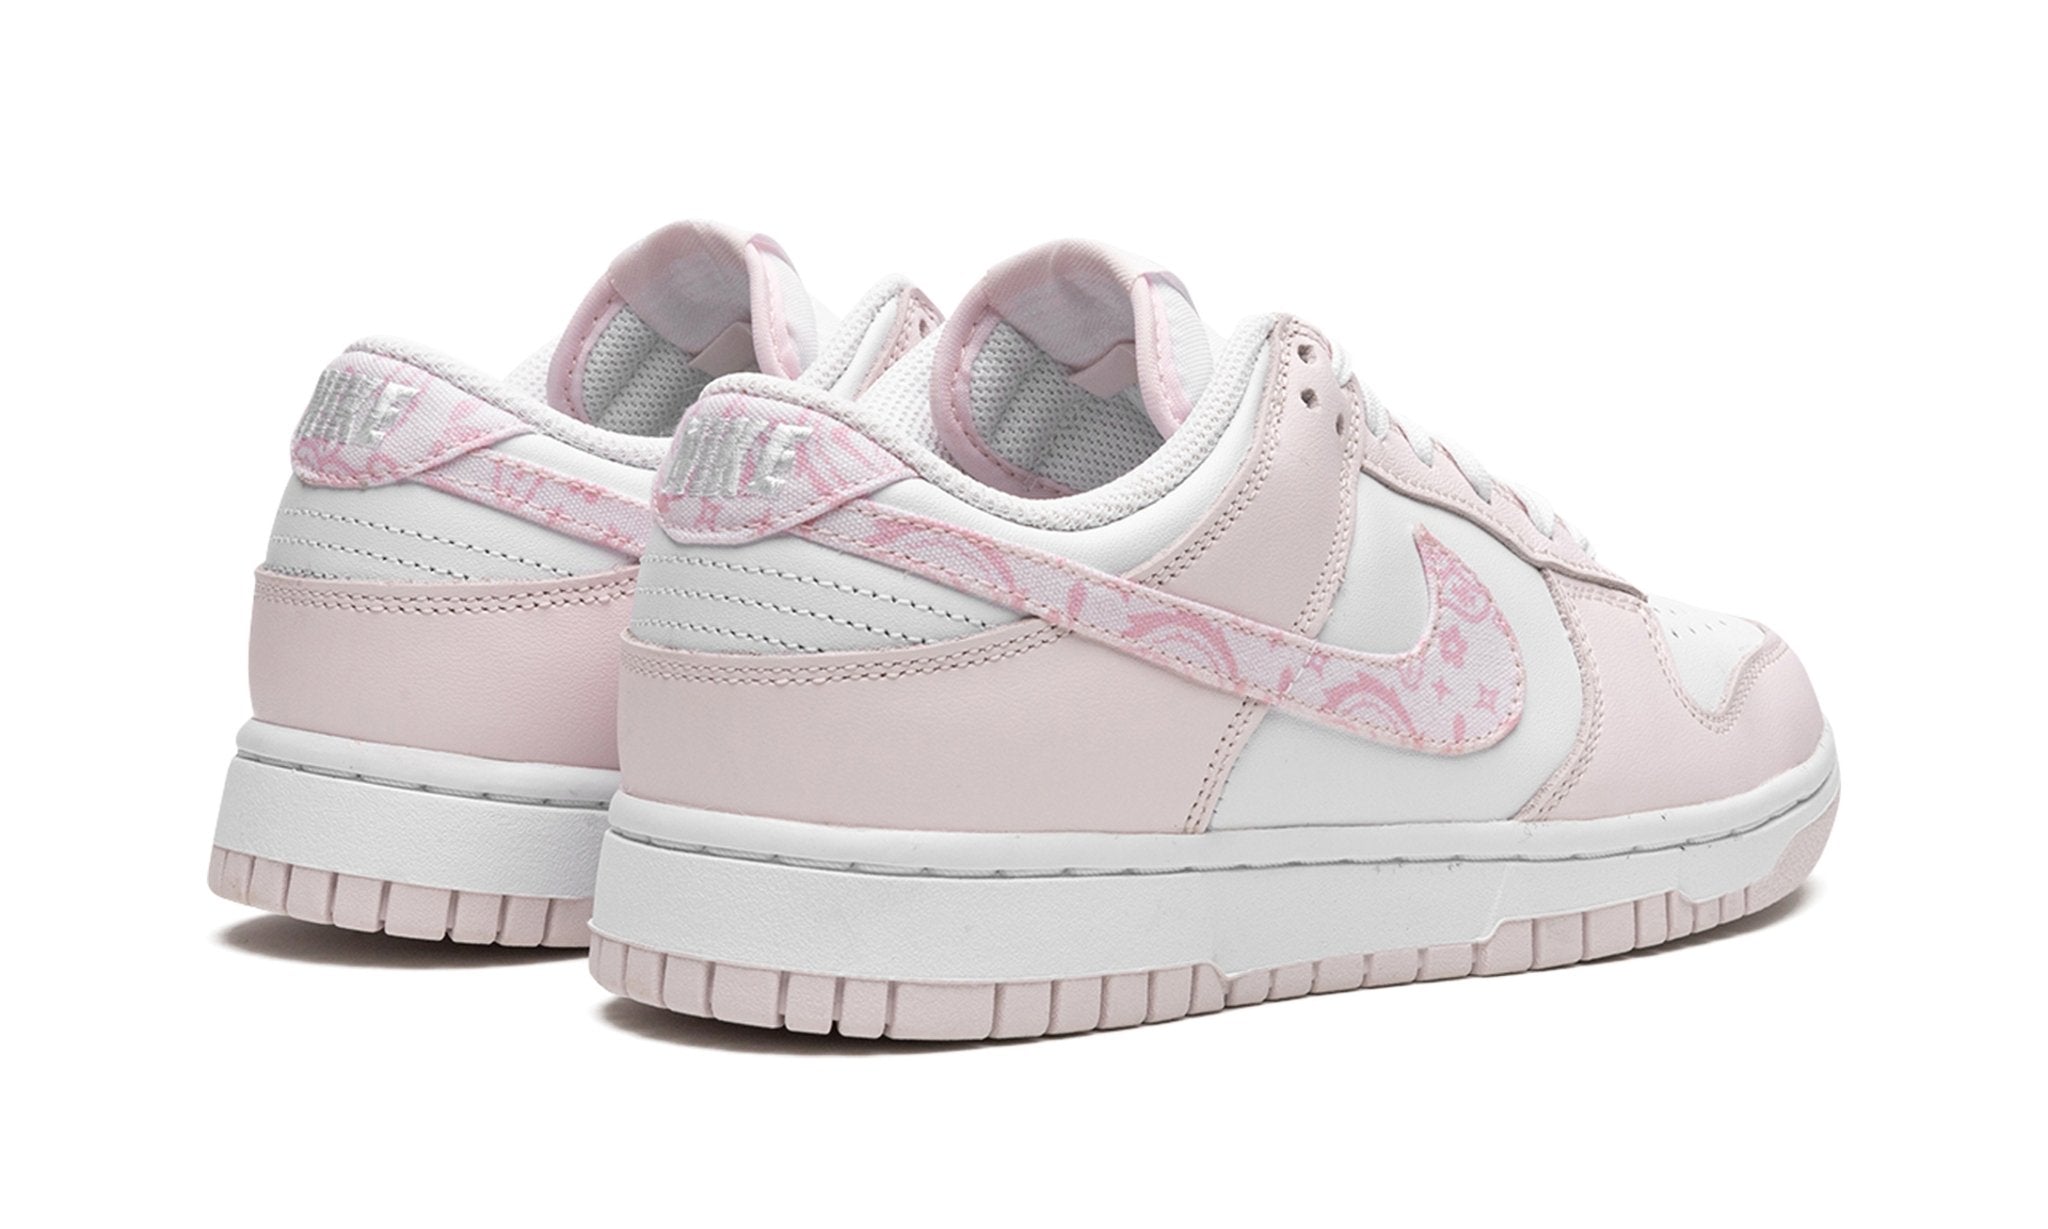 Nike Dunk Low Essentials Paisley Pack “Pink” (WMNS)